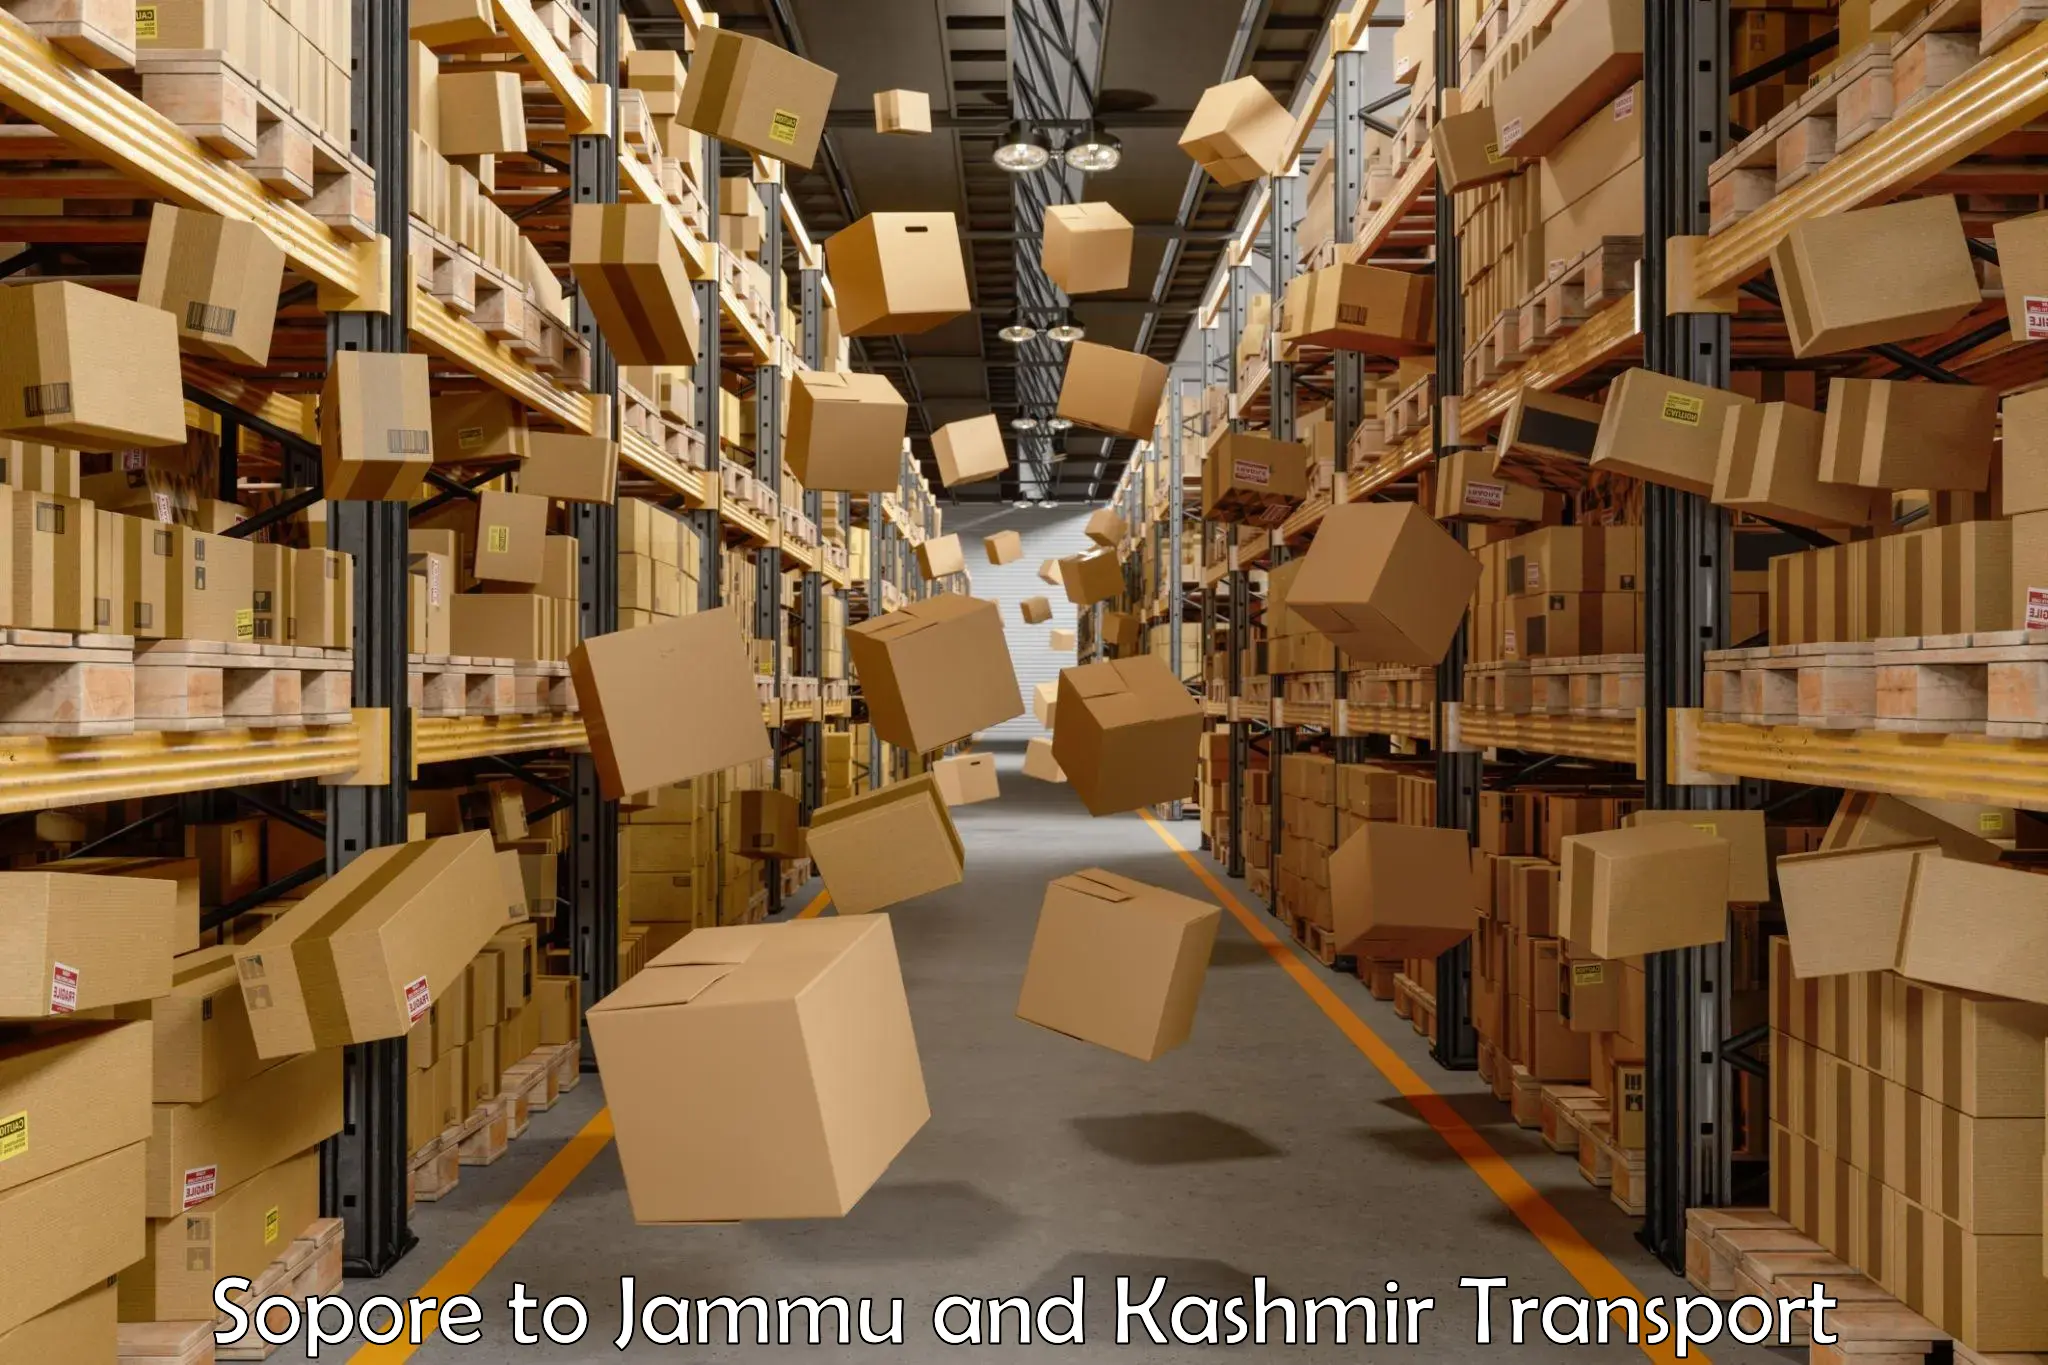 Truck transport companies in India Sopore to Pulwama